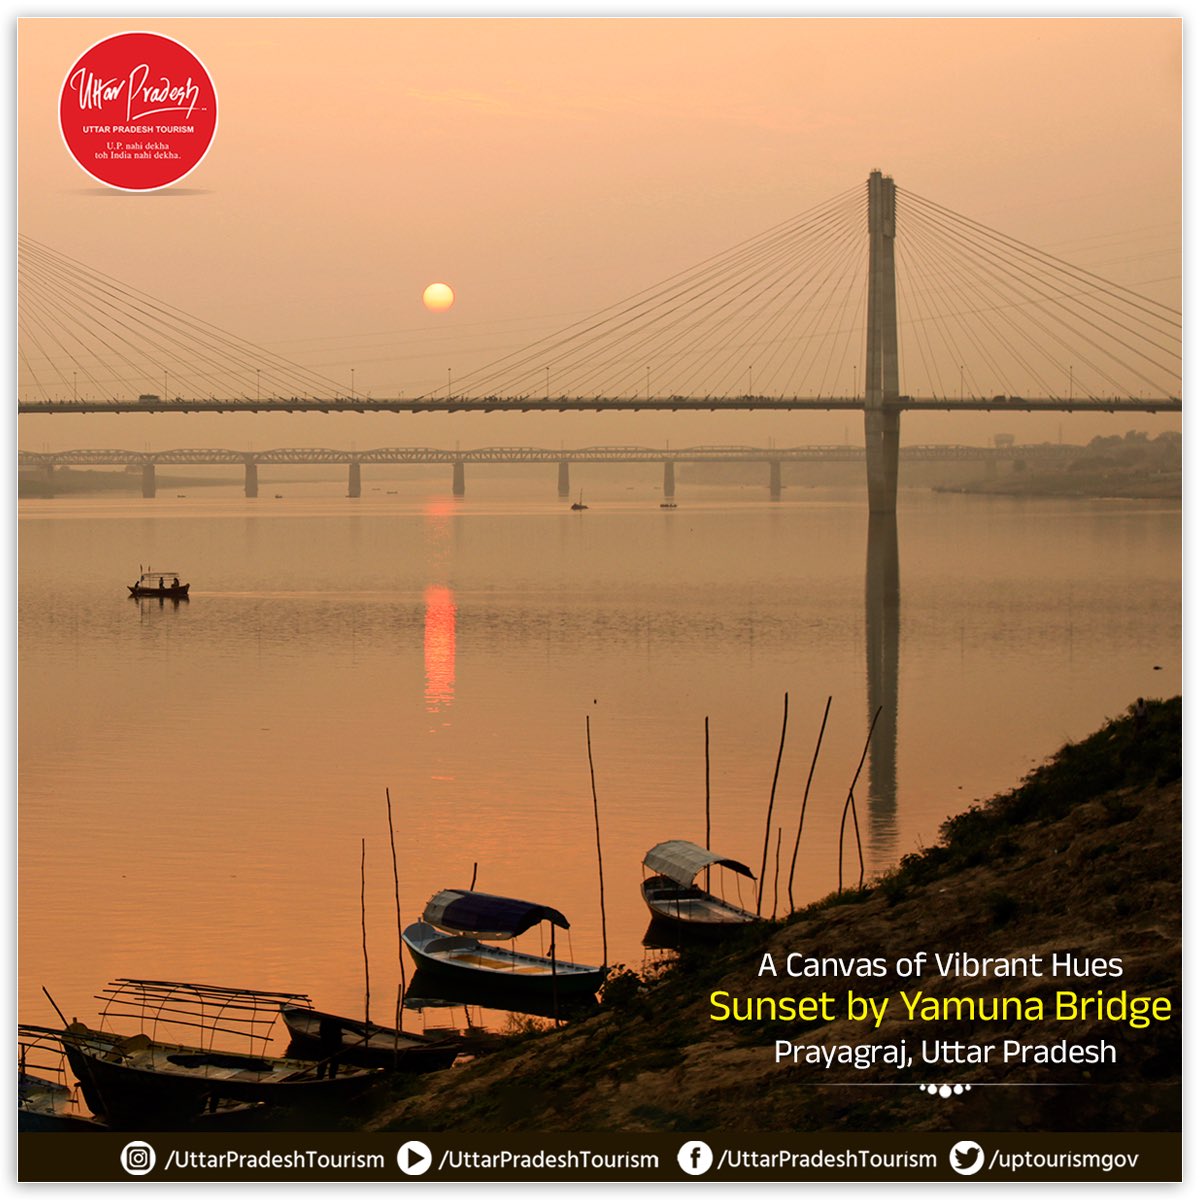 Experience the breathtaking sunset by the #YamunaBridge. As the sun dips below the horizon, the sky transforms into a canvas of vibrant hues, reflecting off the tranquil waters of the #YamunaRiver. This picturesque scene captures the serene & peaceful essence of #Prayagraj.